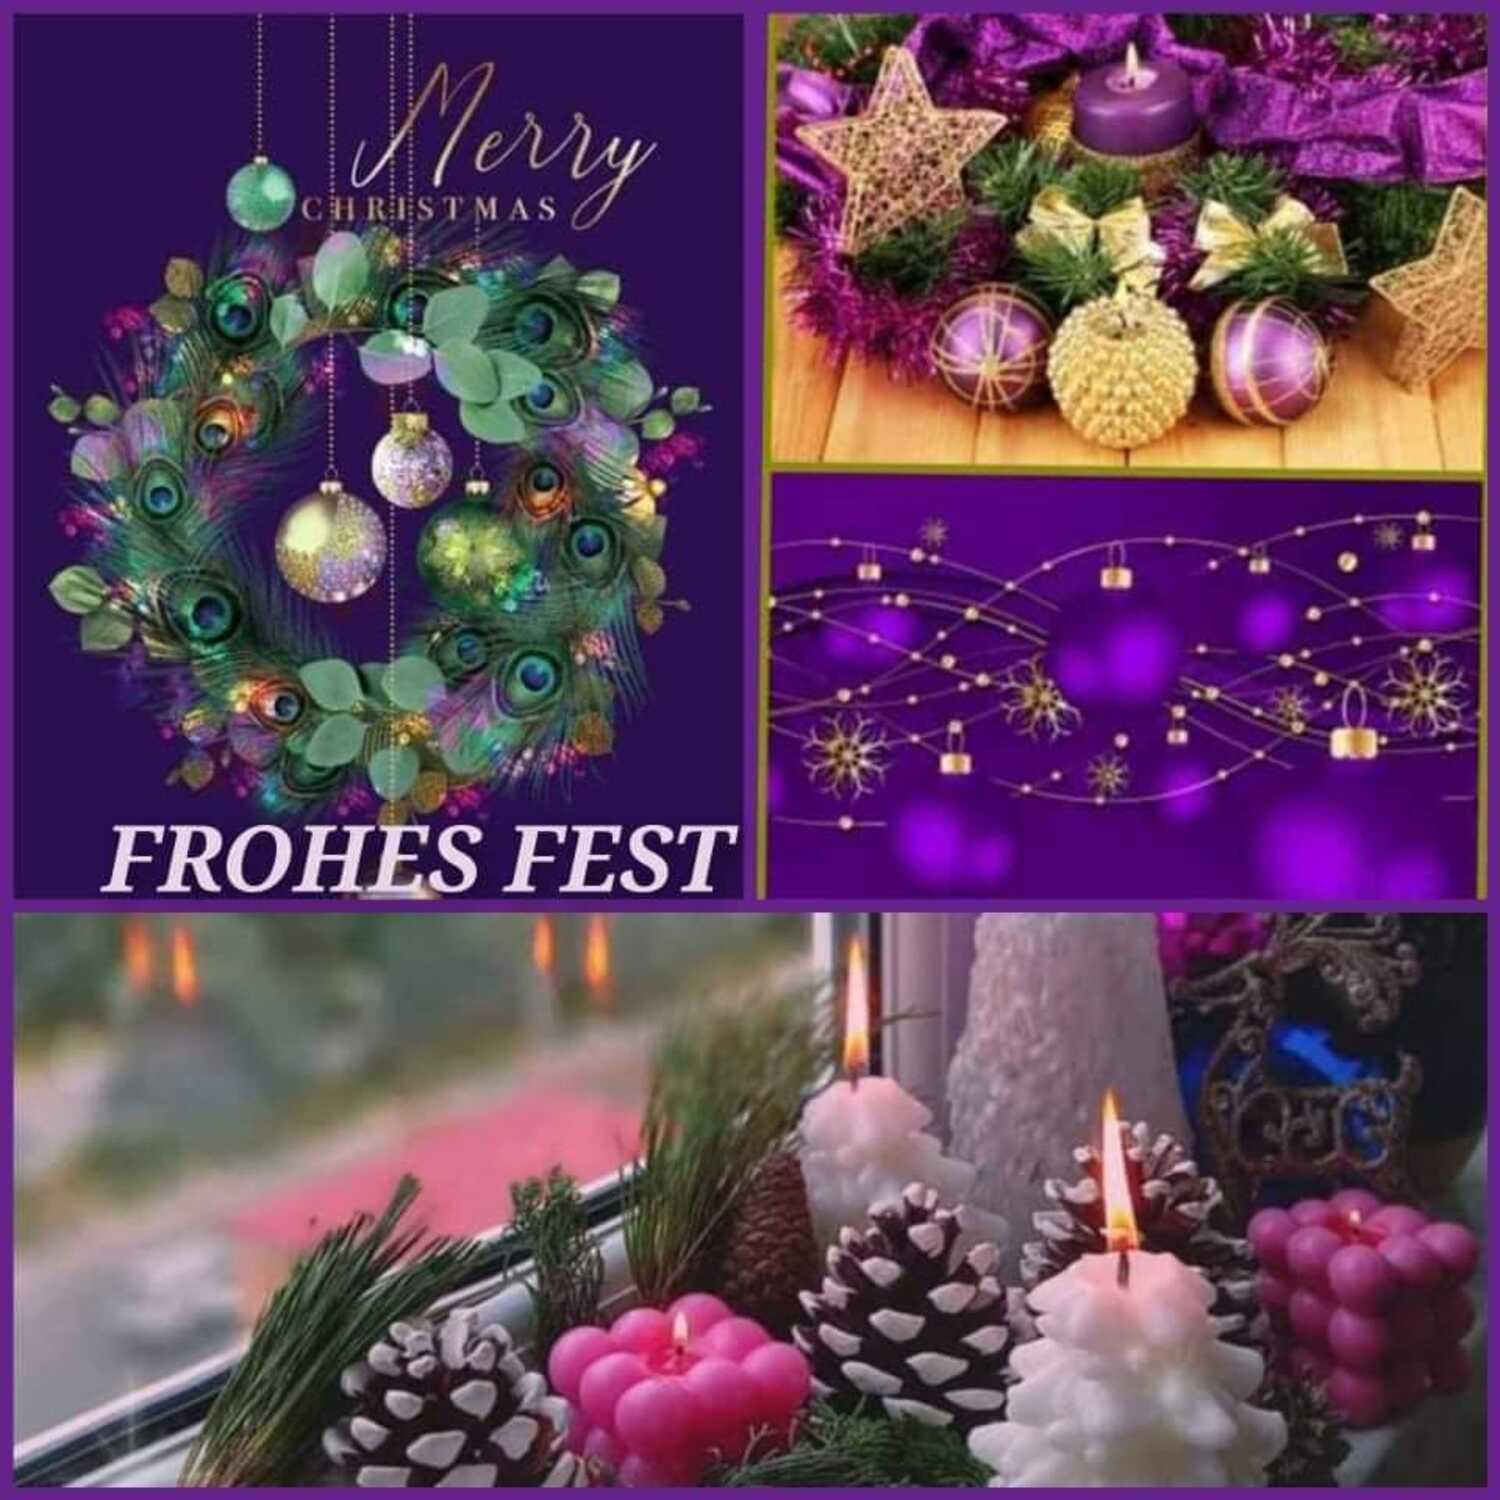 Merry Christmas Frohes Fest